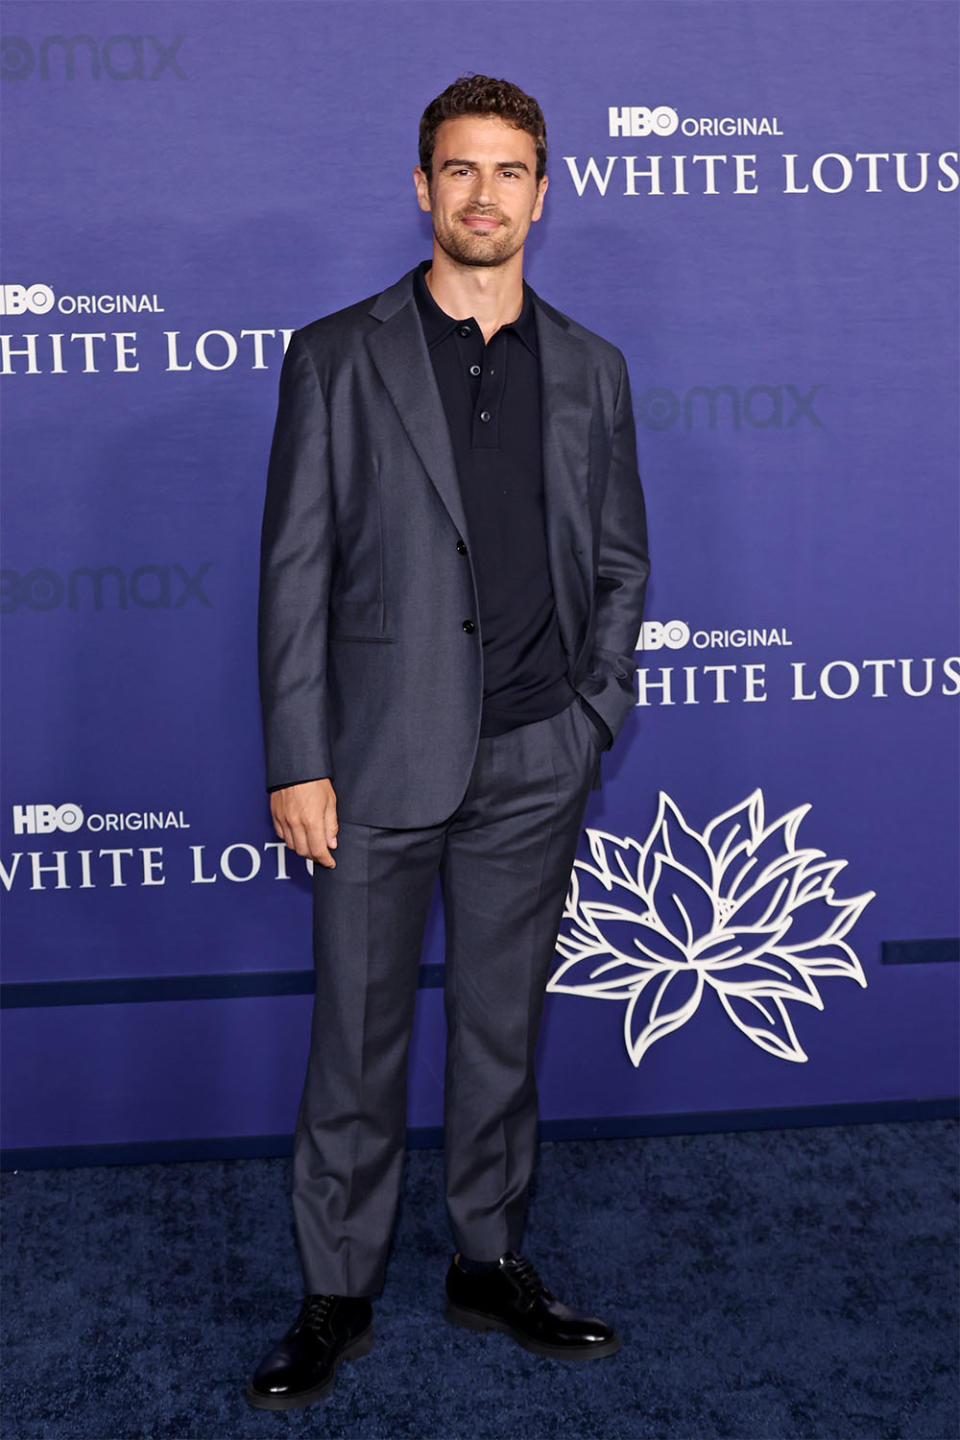 Theo James attends the Los Angeles Season 2 Premiere of HBO Original Series "The White Lotus" at Goya Studios on October 20, 2022 in Los Angeles, California.